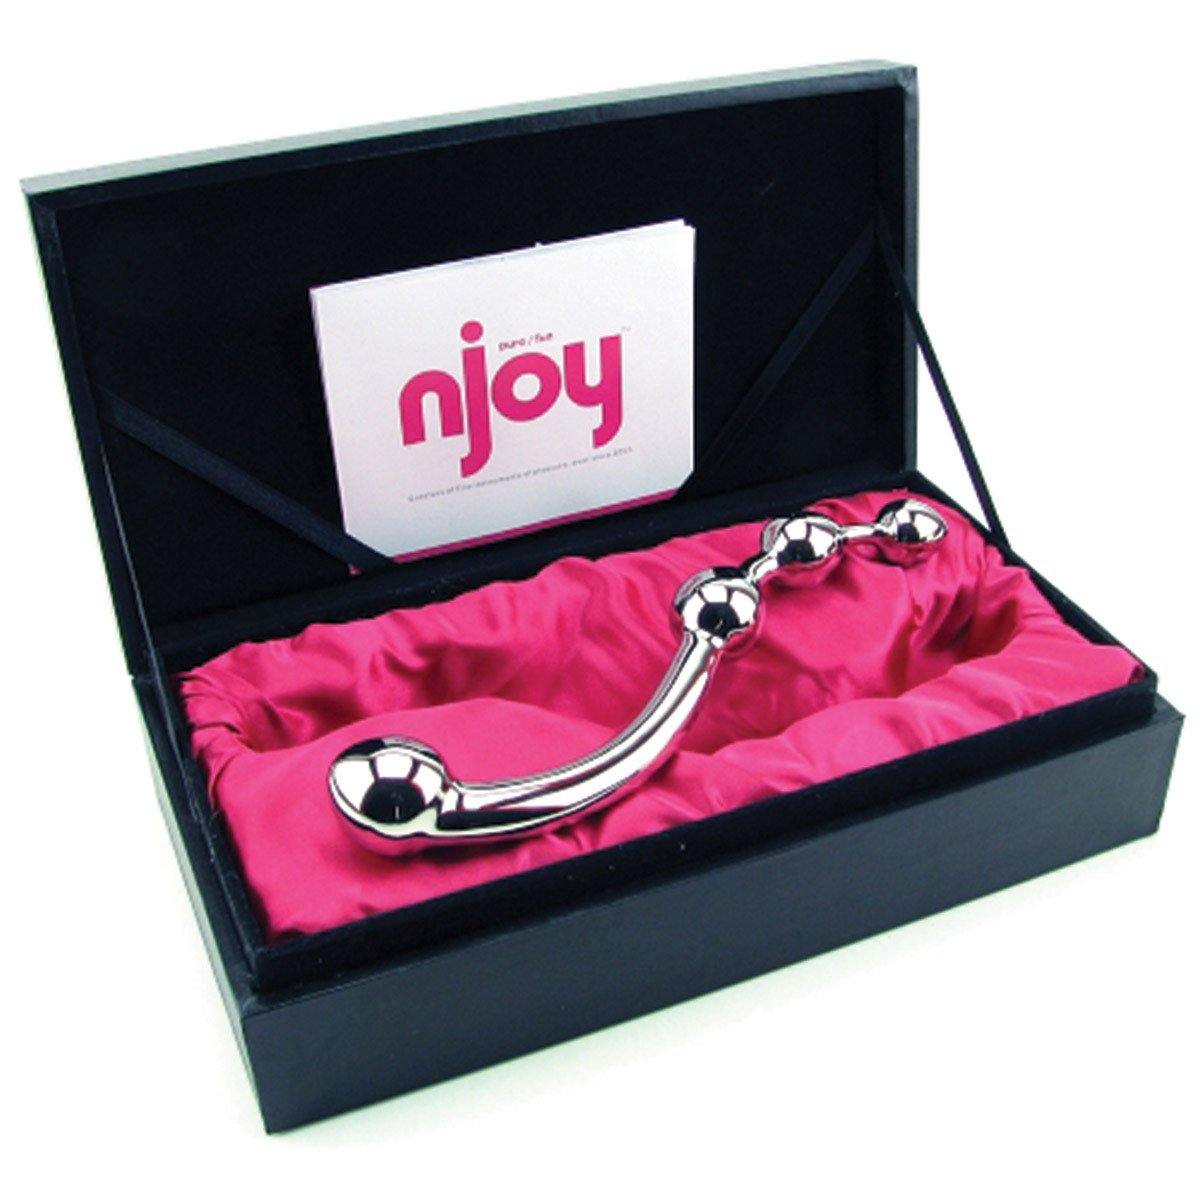 Njoy Fun Wand - Buy At Luxury Toy X - Free 3-Day Shipping